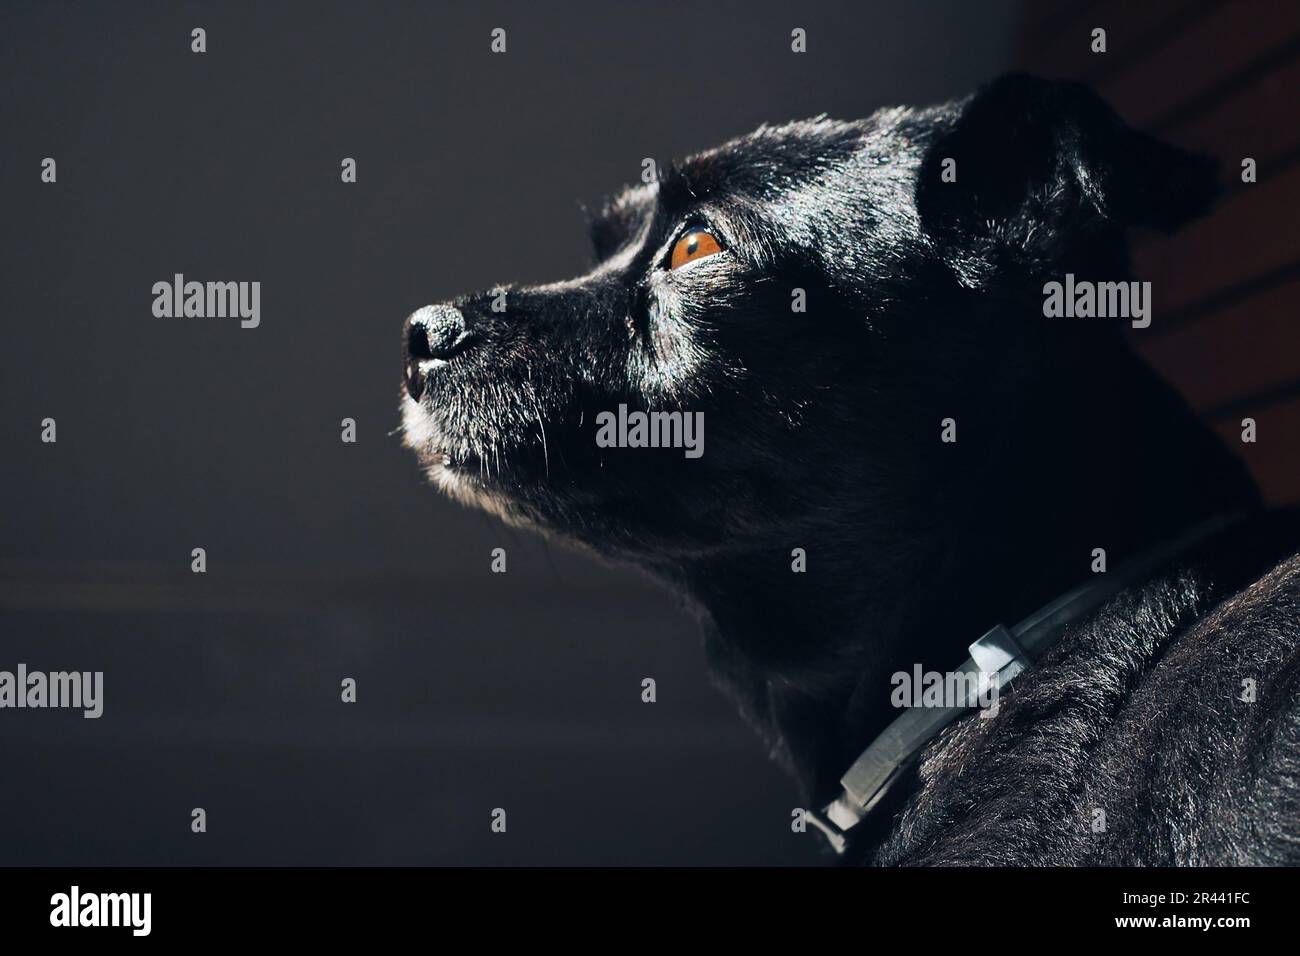 Black dog with brown eyes looking up. Stock Photo